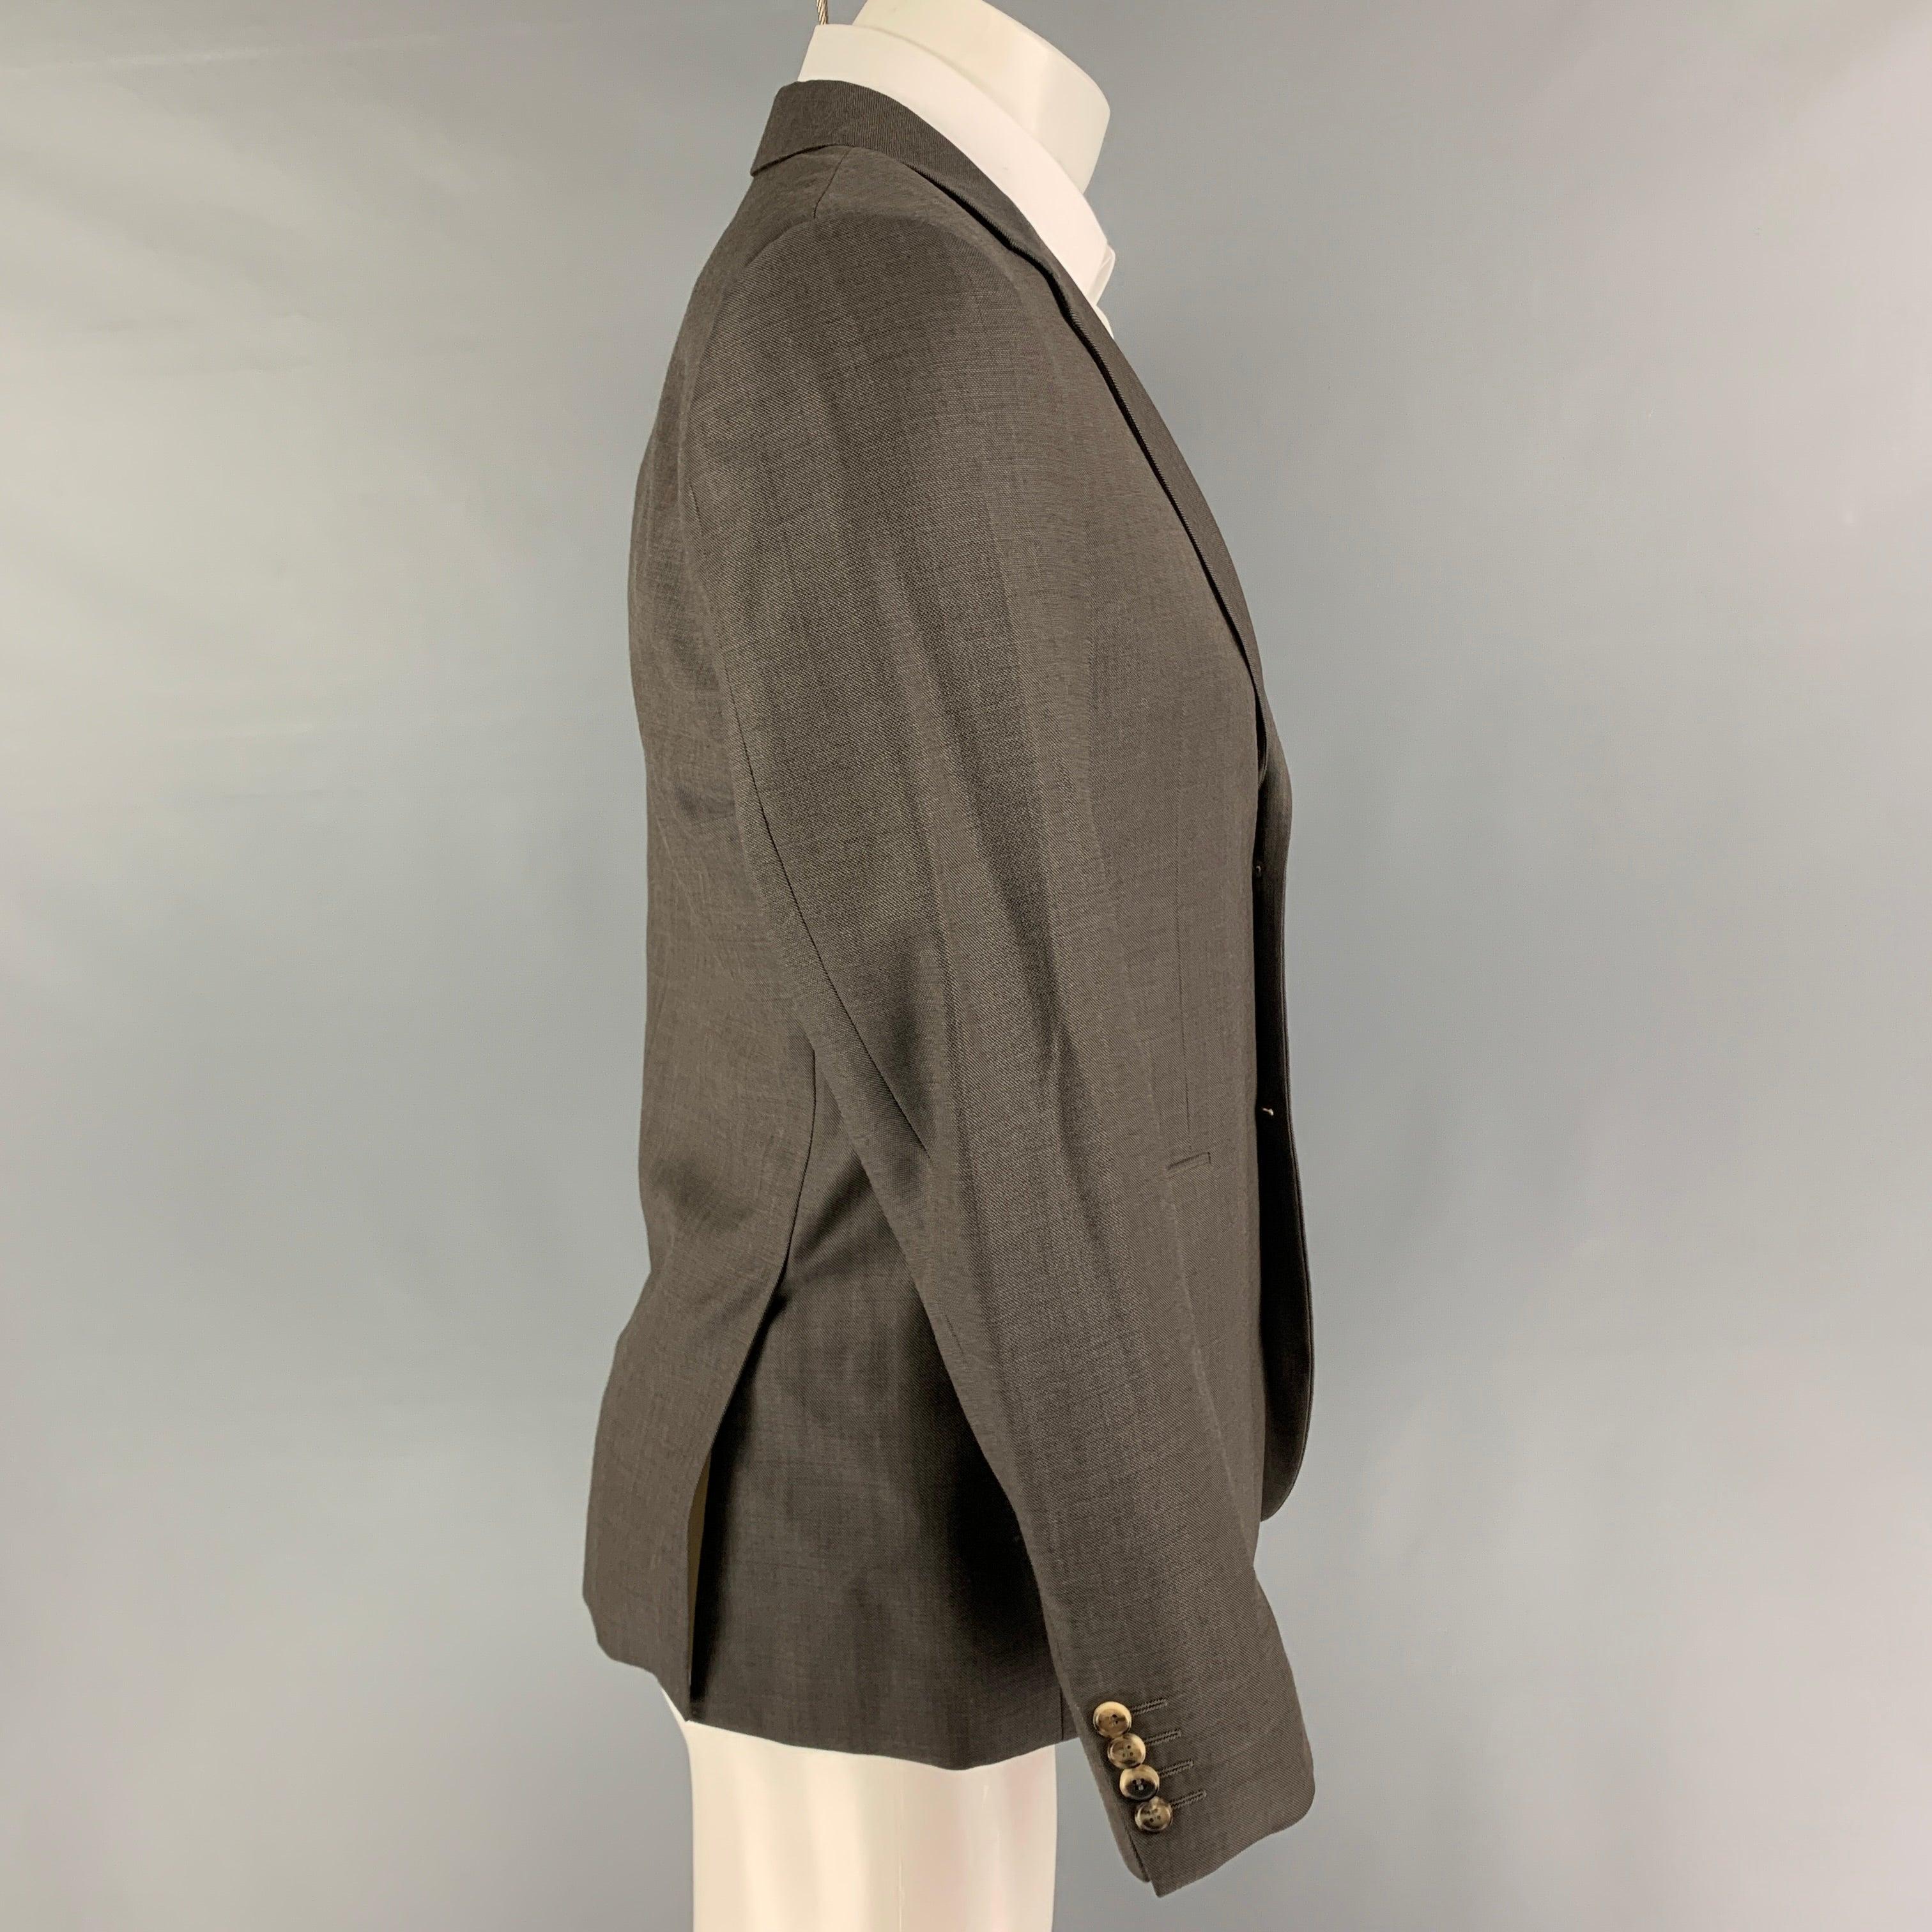 CALVIN KLEIN COLLECTION sport coat comes in a grey wool with a full liner featuring a notch lapel, flap pockets, double back vent, and a double button closure.
Very Good
Pre-Owned Condition. 

Marked:   46/36 

Measurements: 
 
Shoulder: 17.5 inches